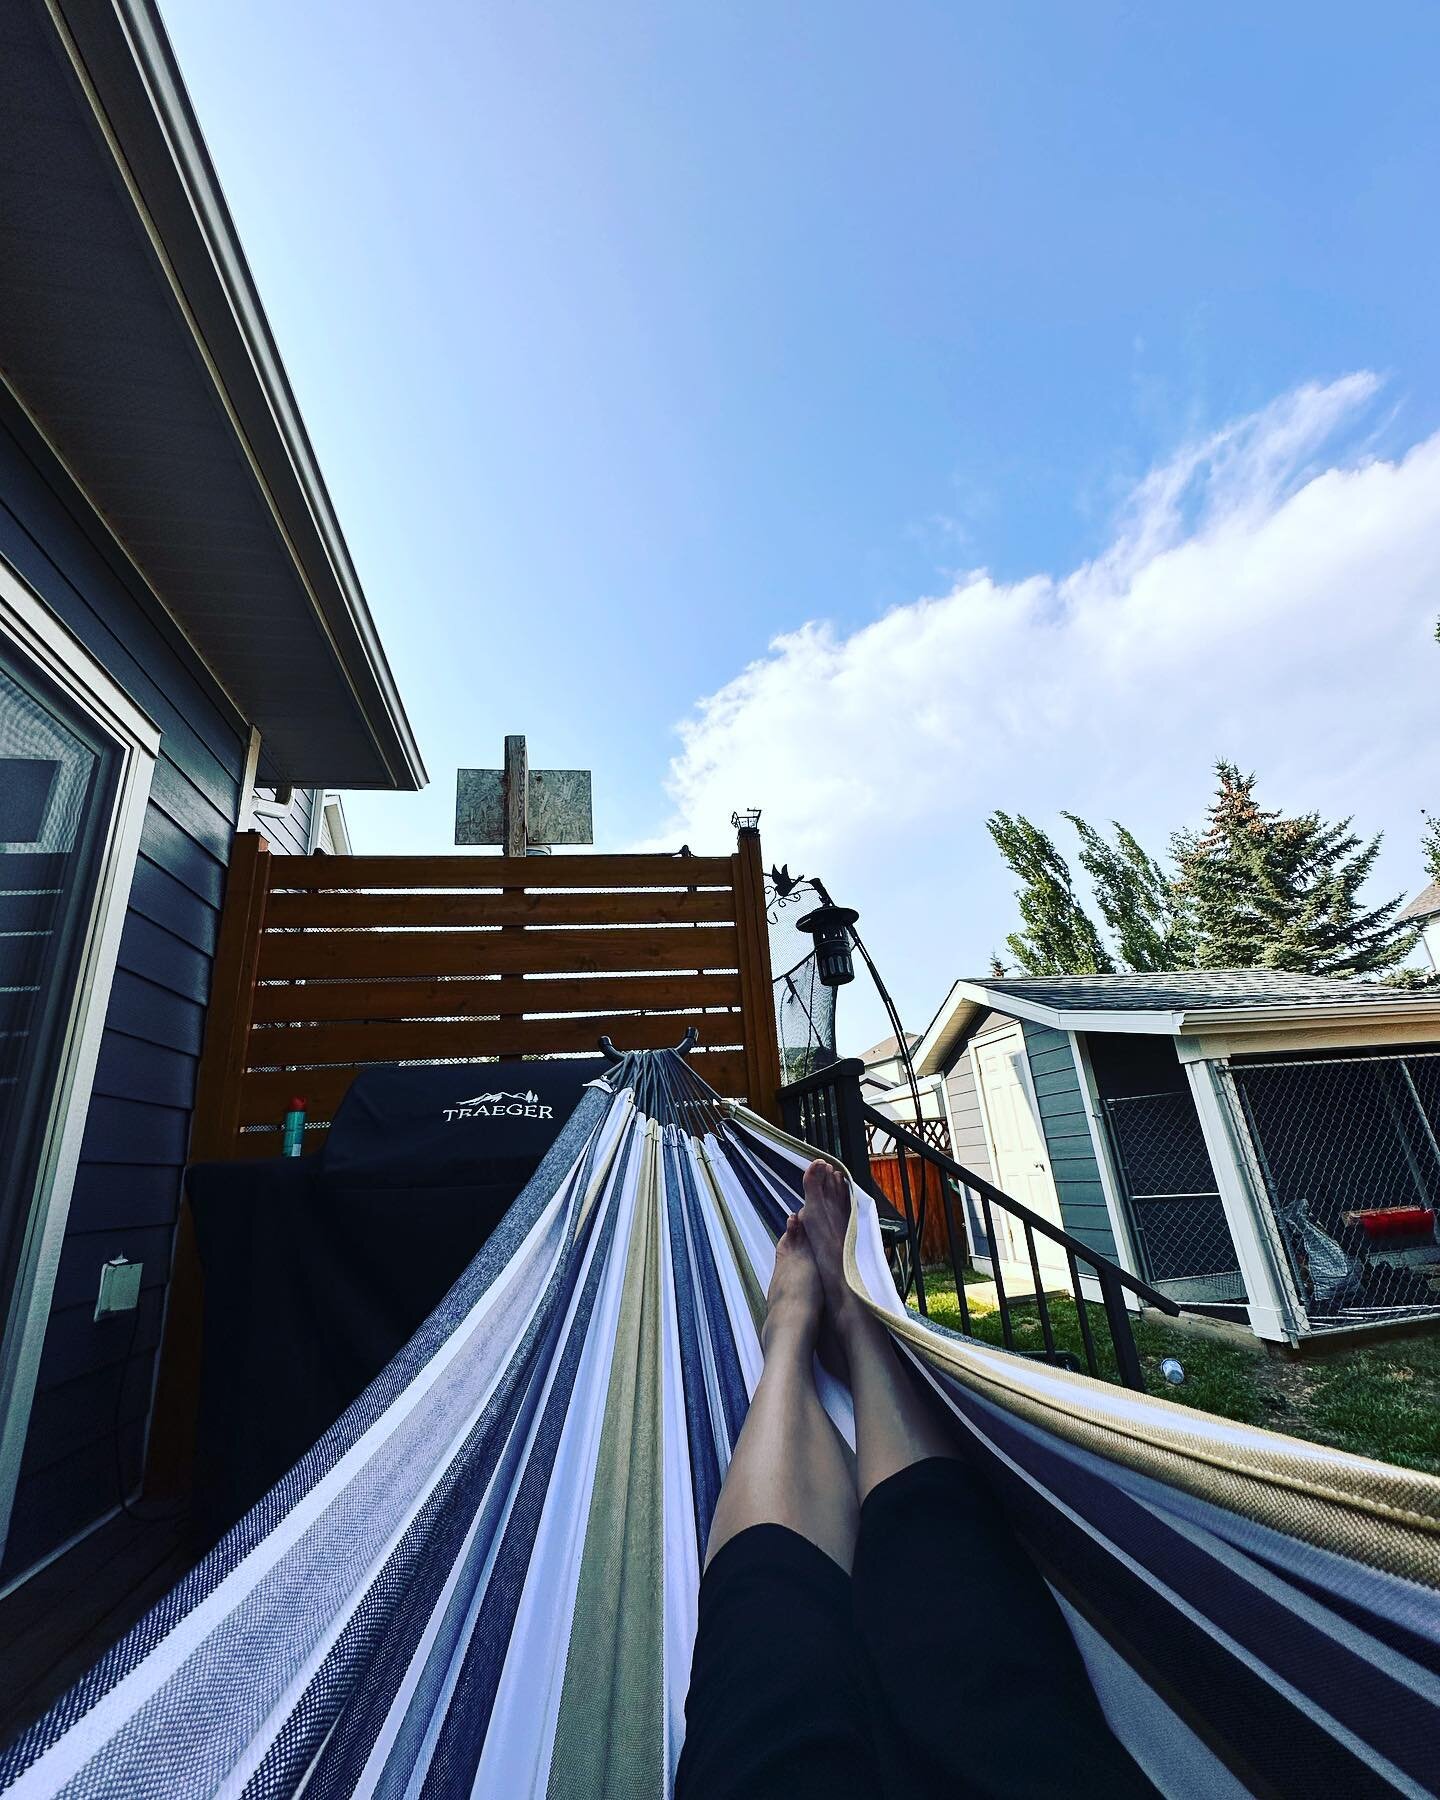 My husband grabbed himself this hammock for his birthday last month&hellip; I am loving it.  I love everything about my house except I do wish I had a bigger yard.  What are some of your backyard must haves?

Anona Adams | REALTOR&reg;️
CIR REALTY
Ma